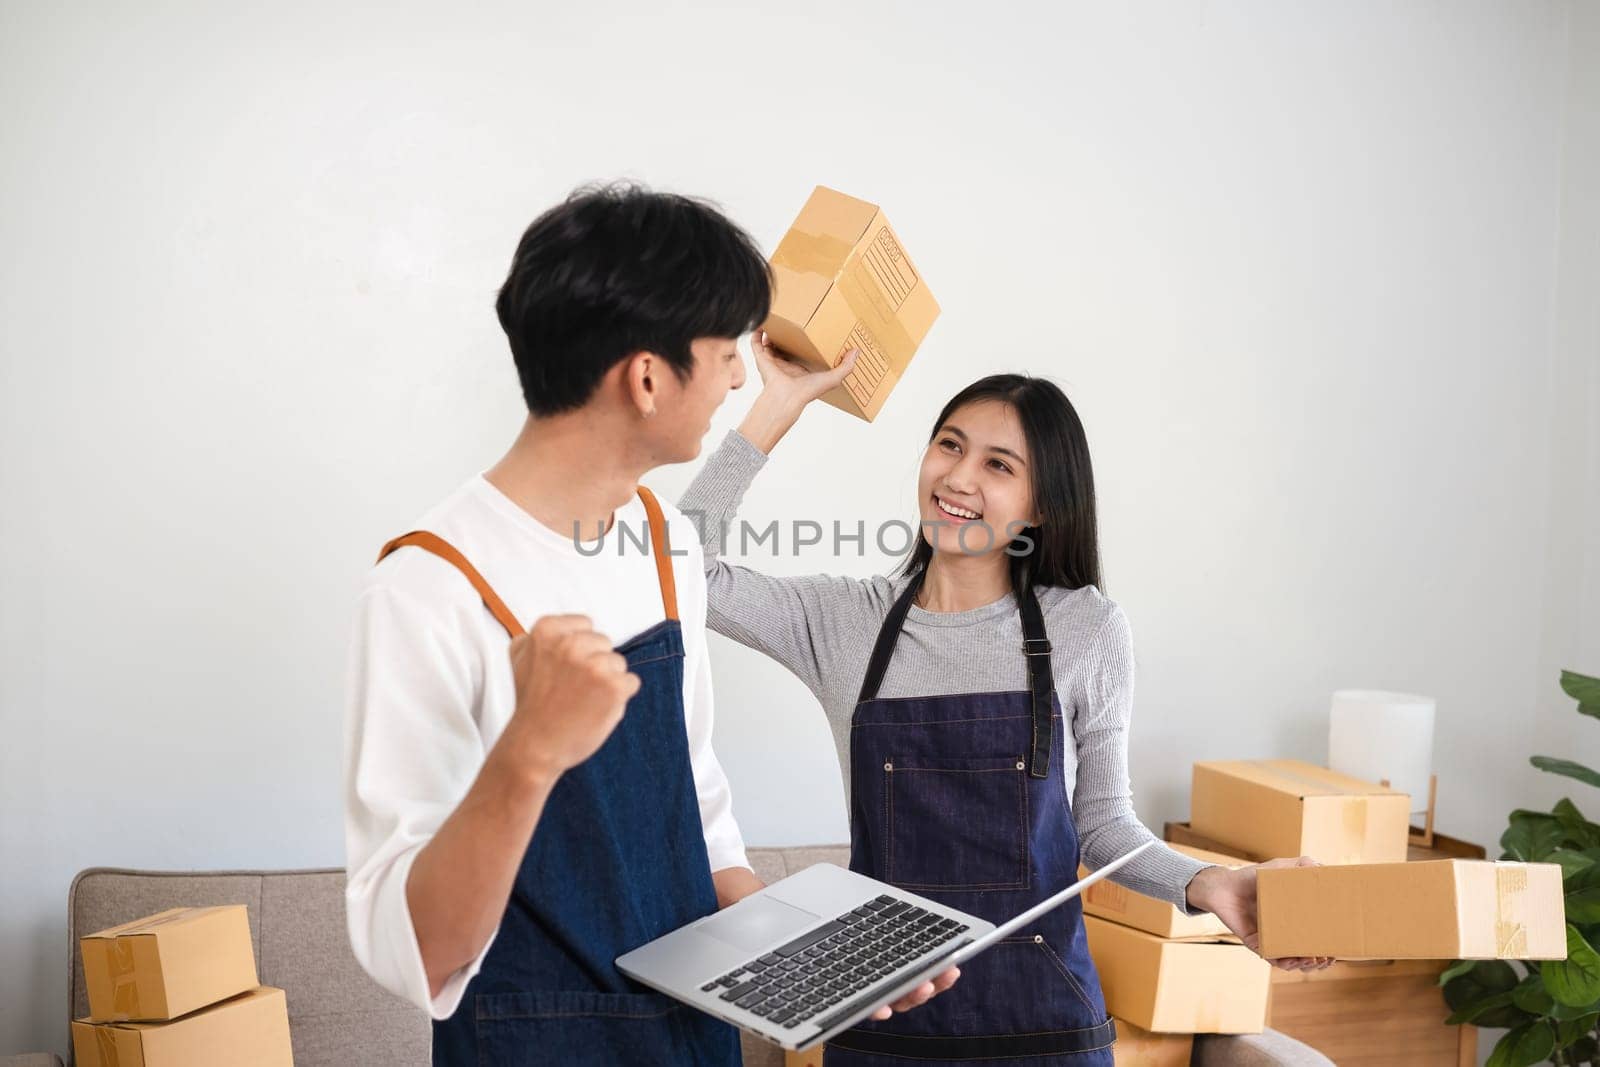 A cheerful couple working together in their home office, packing boxes and managing their online business. They are wearing aprons and holding packages, showcasing their e-commerce venture.